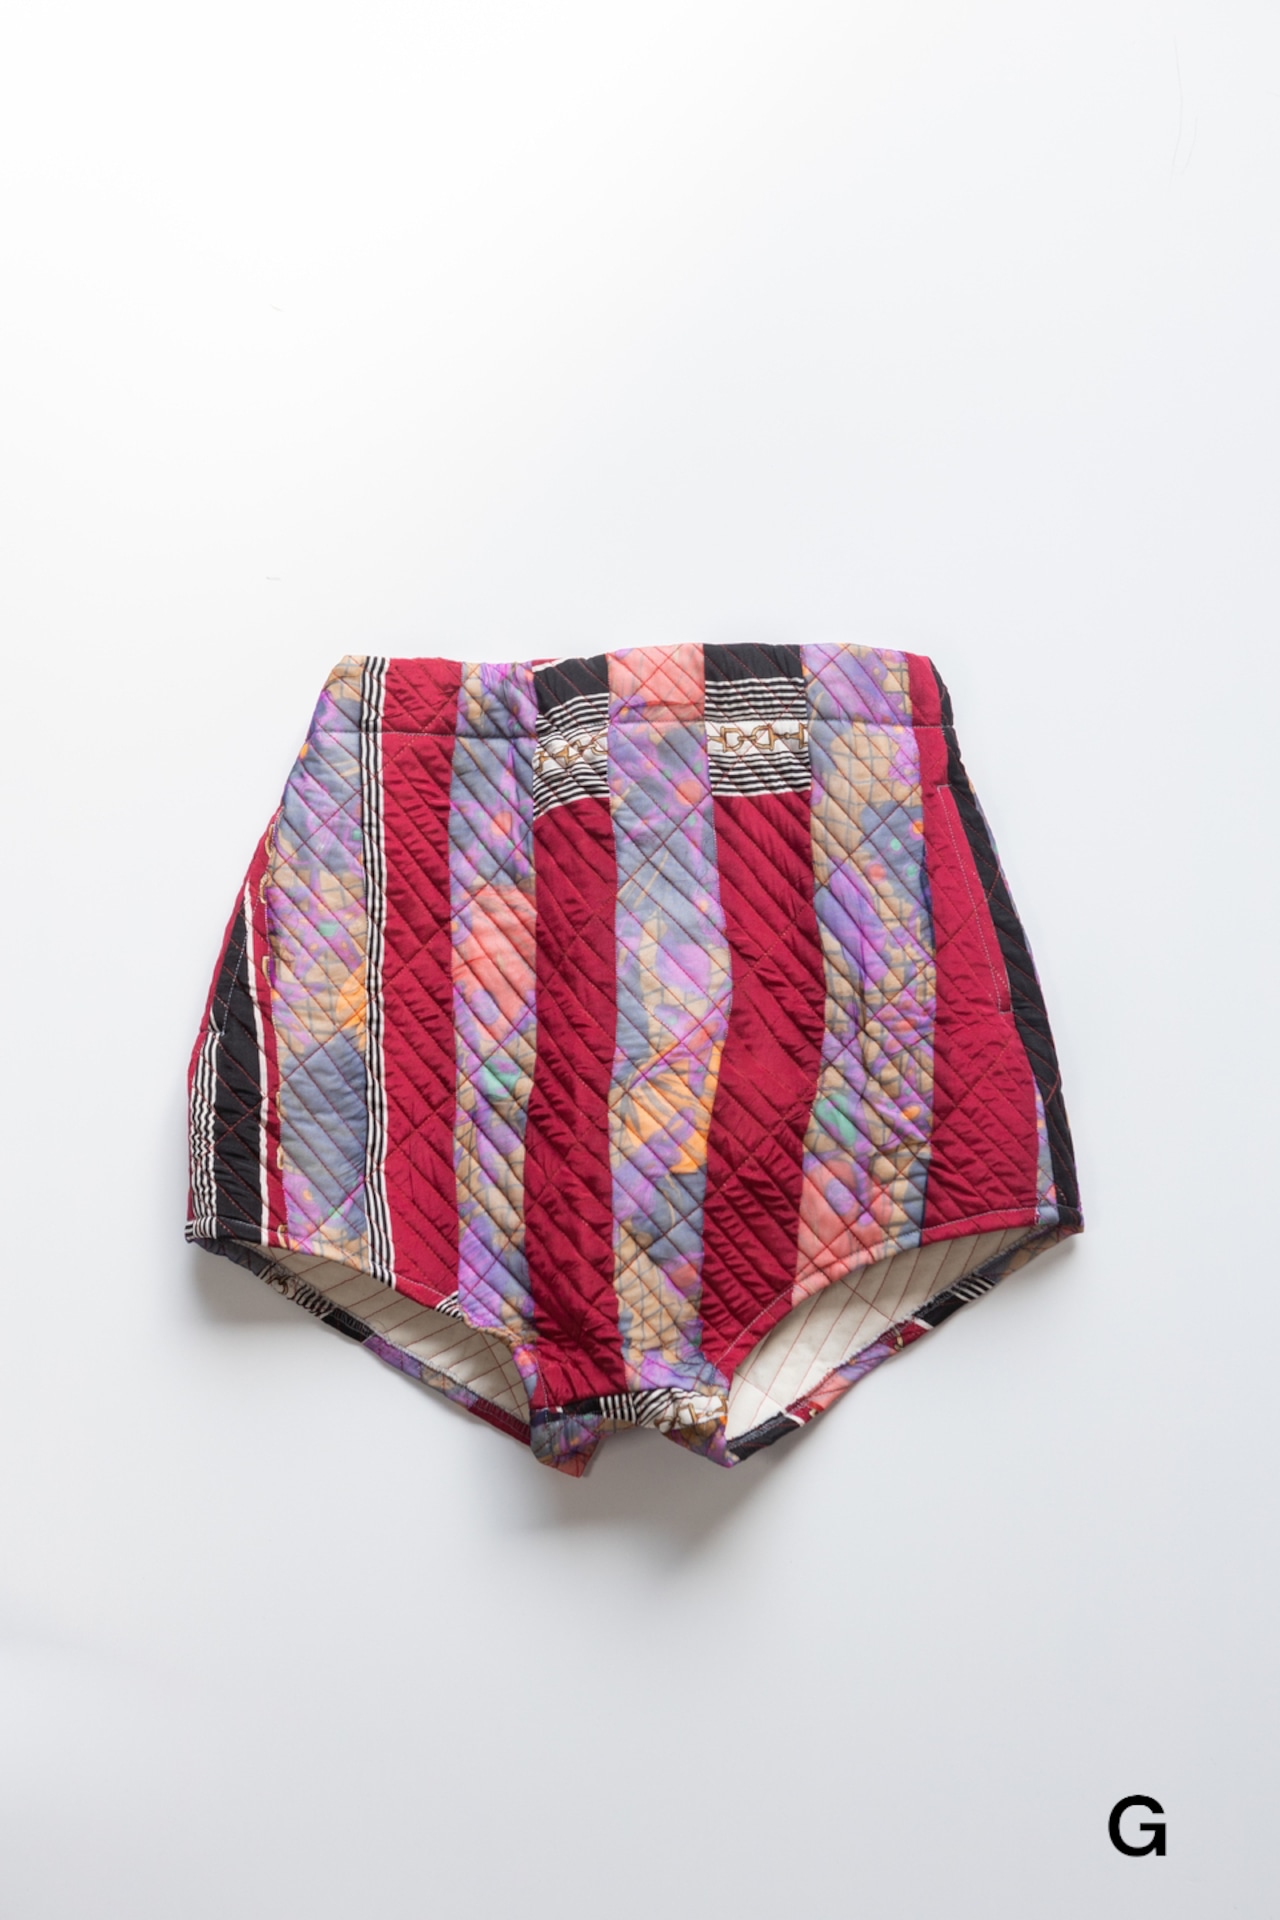 ASTER Short pants “Quilting Baby”